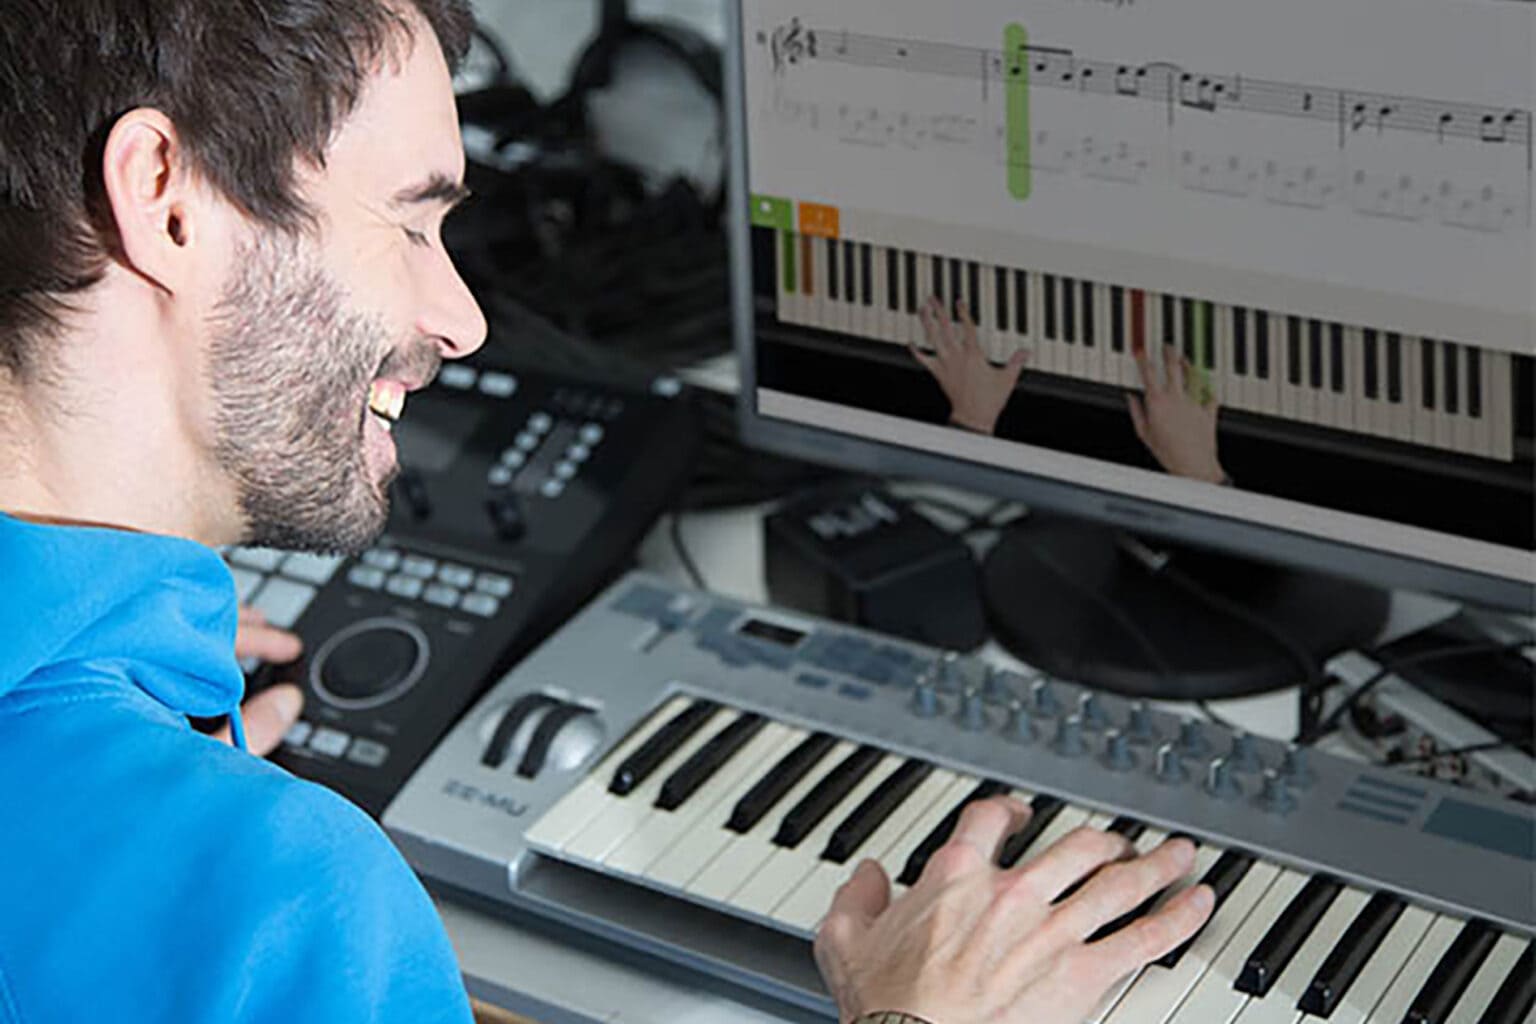 Save over 50% on an AI piano teacher that could be key to your music education.